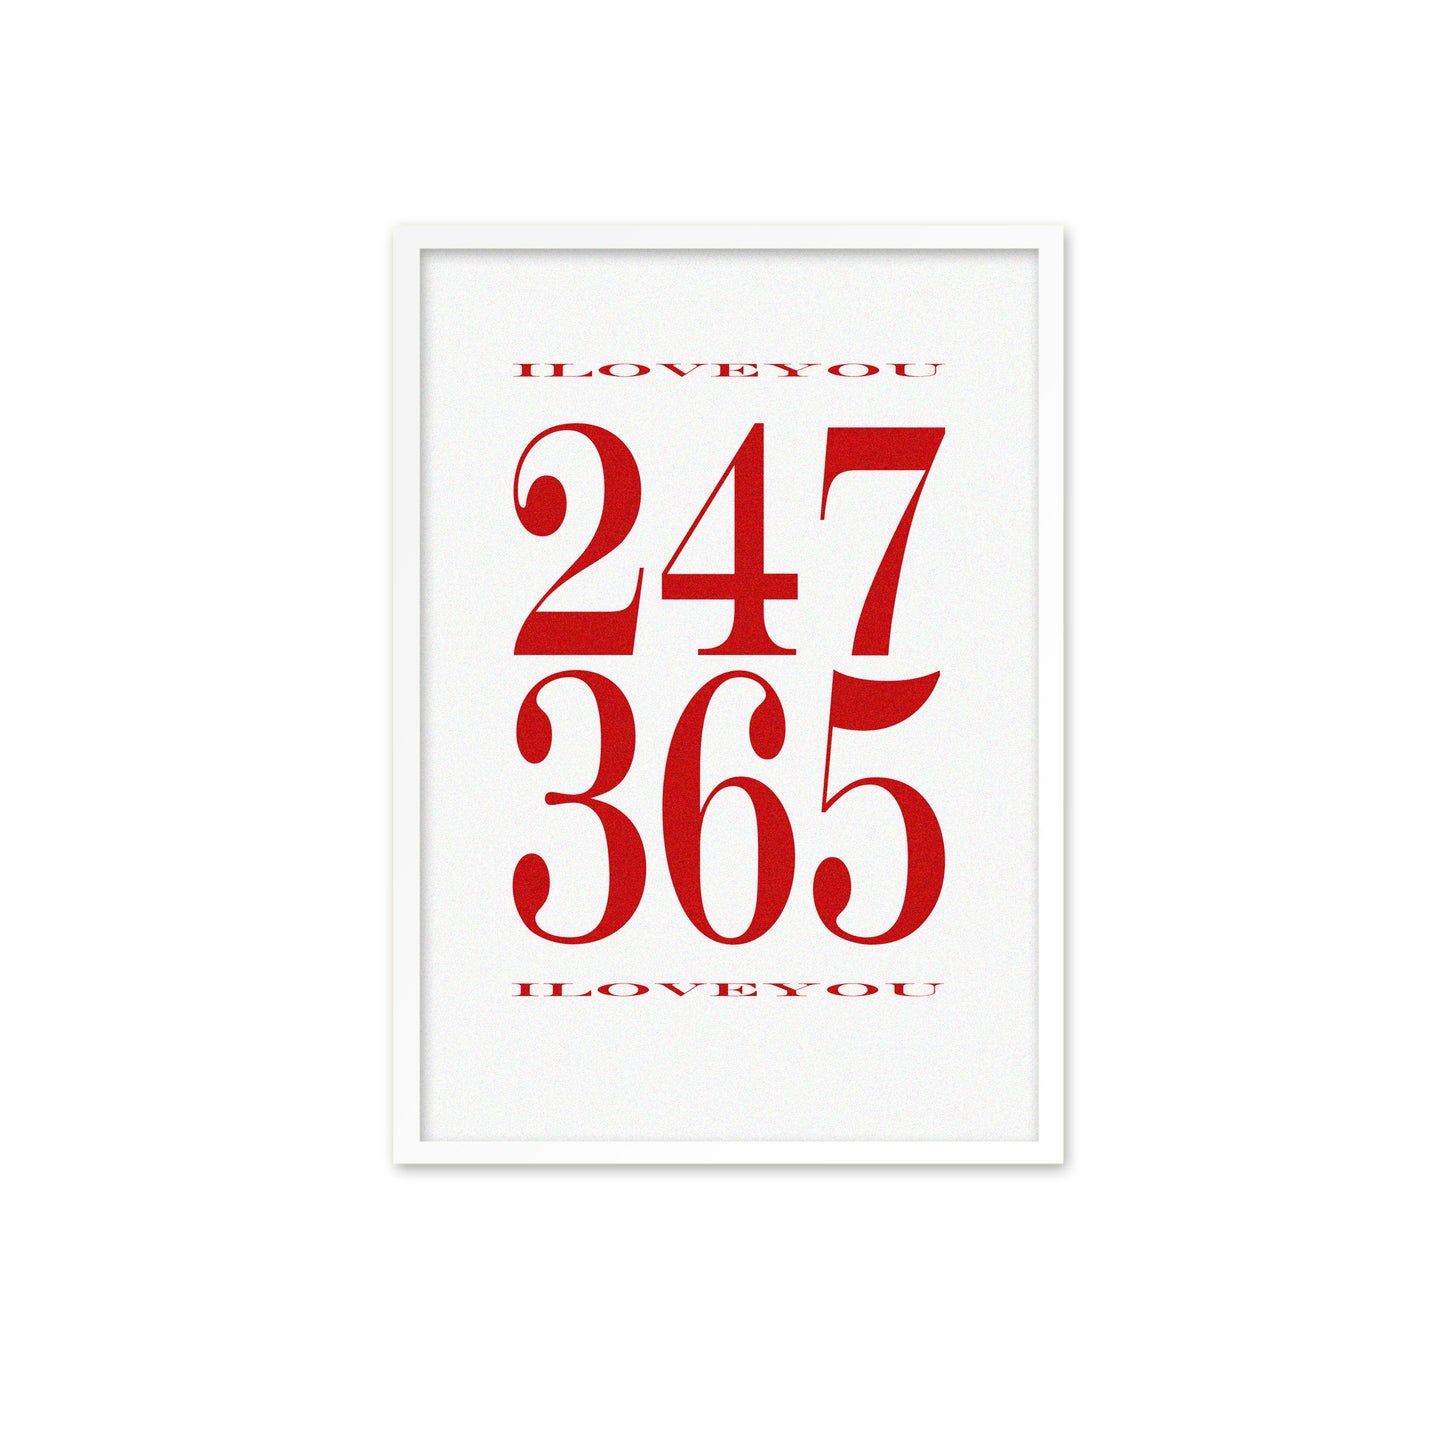 247, 365 - red on white print